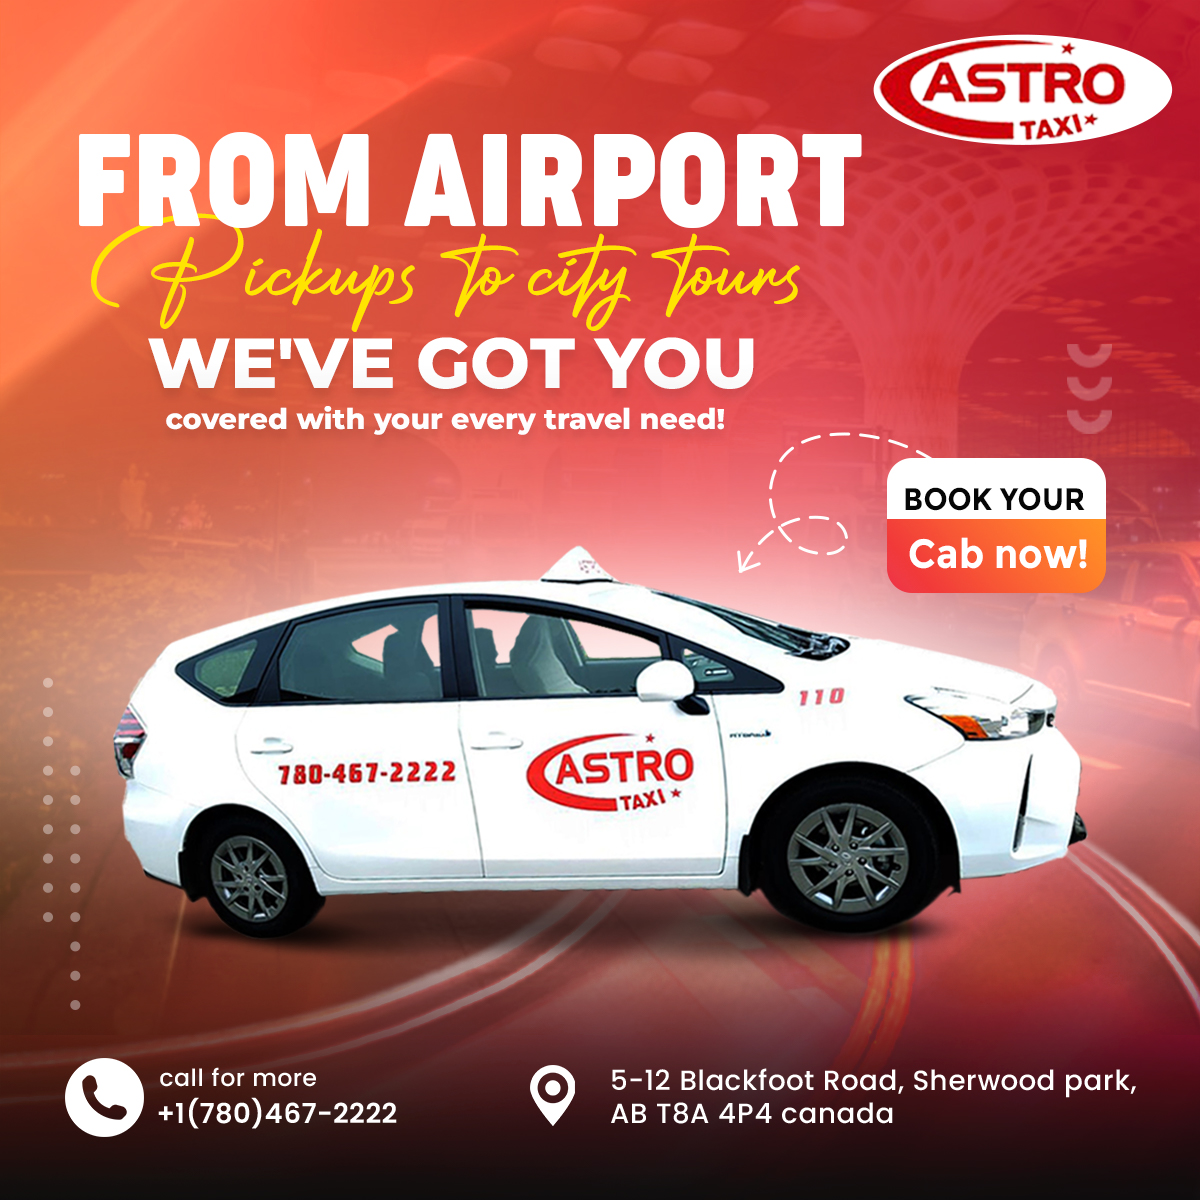 From airport pickups to city tours we’ve got you covered with your every travel need!

BOOK NOW!
☎+1(780)467-2222

#airportpickups #everytravelneed #reasonstochoose #onthetime #bestride #friendlyride #ReliableTransport  #astrotaxicanada #alberta #sherwood #sherwoodpark #canada